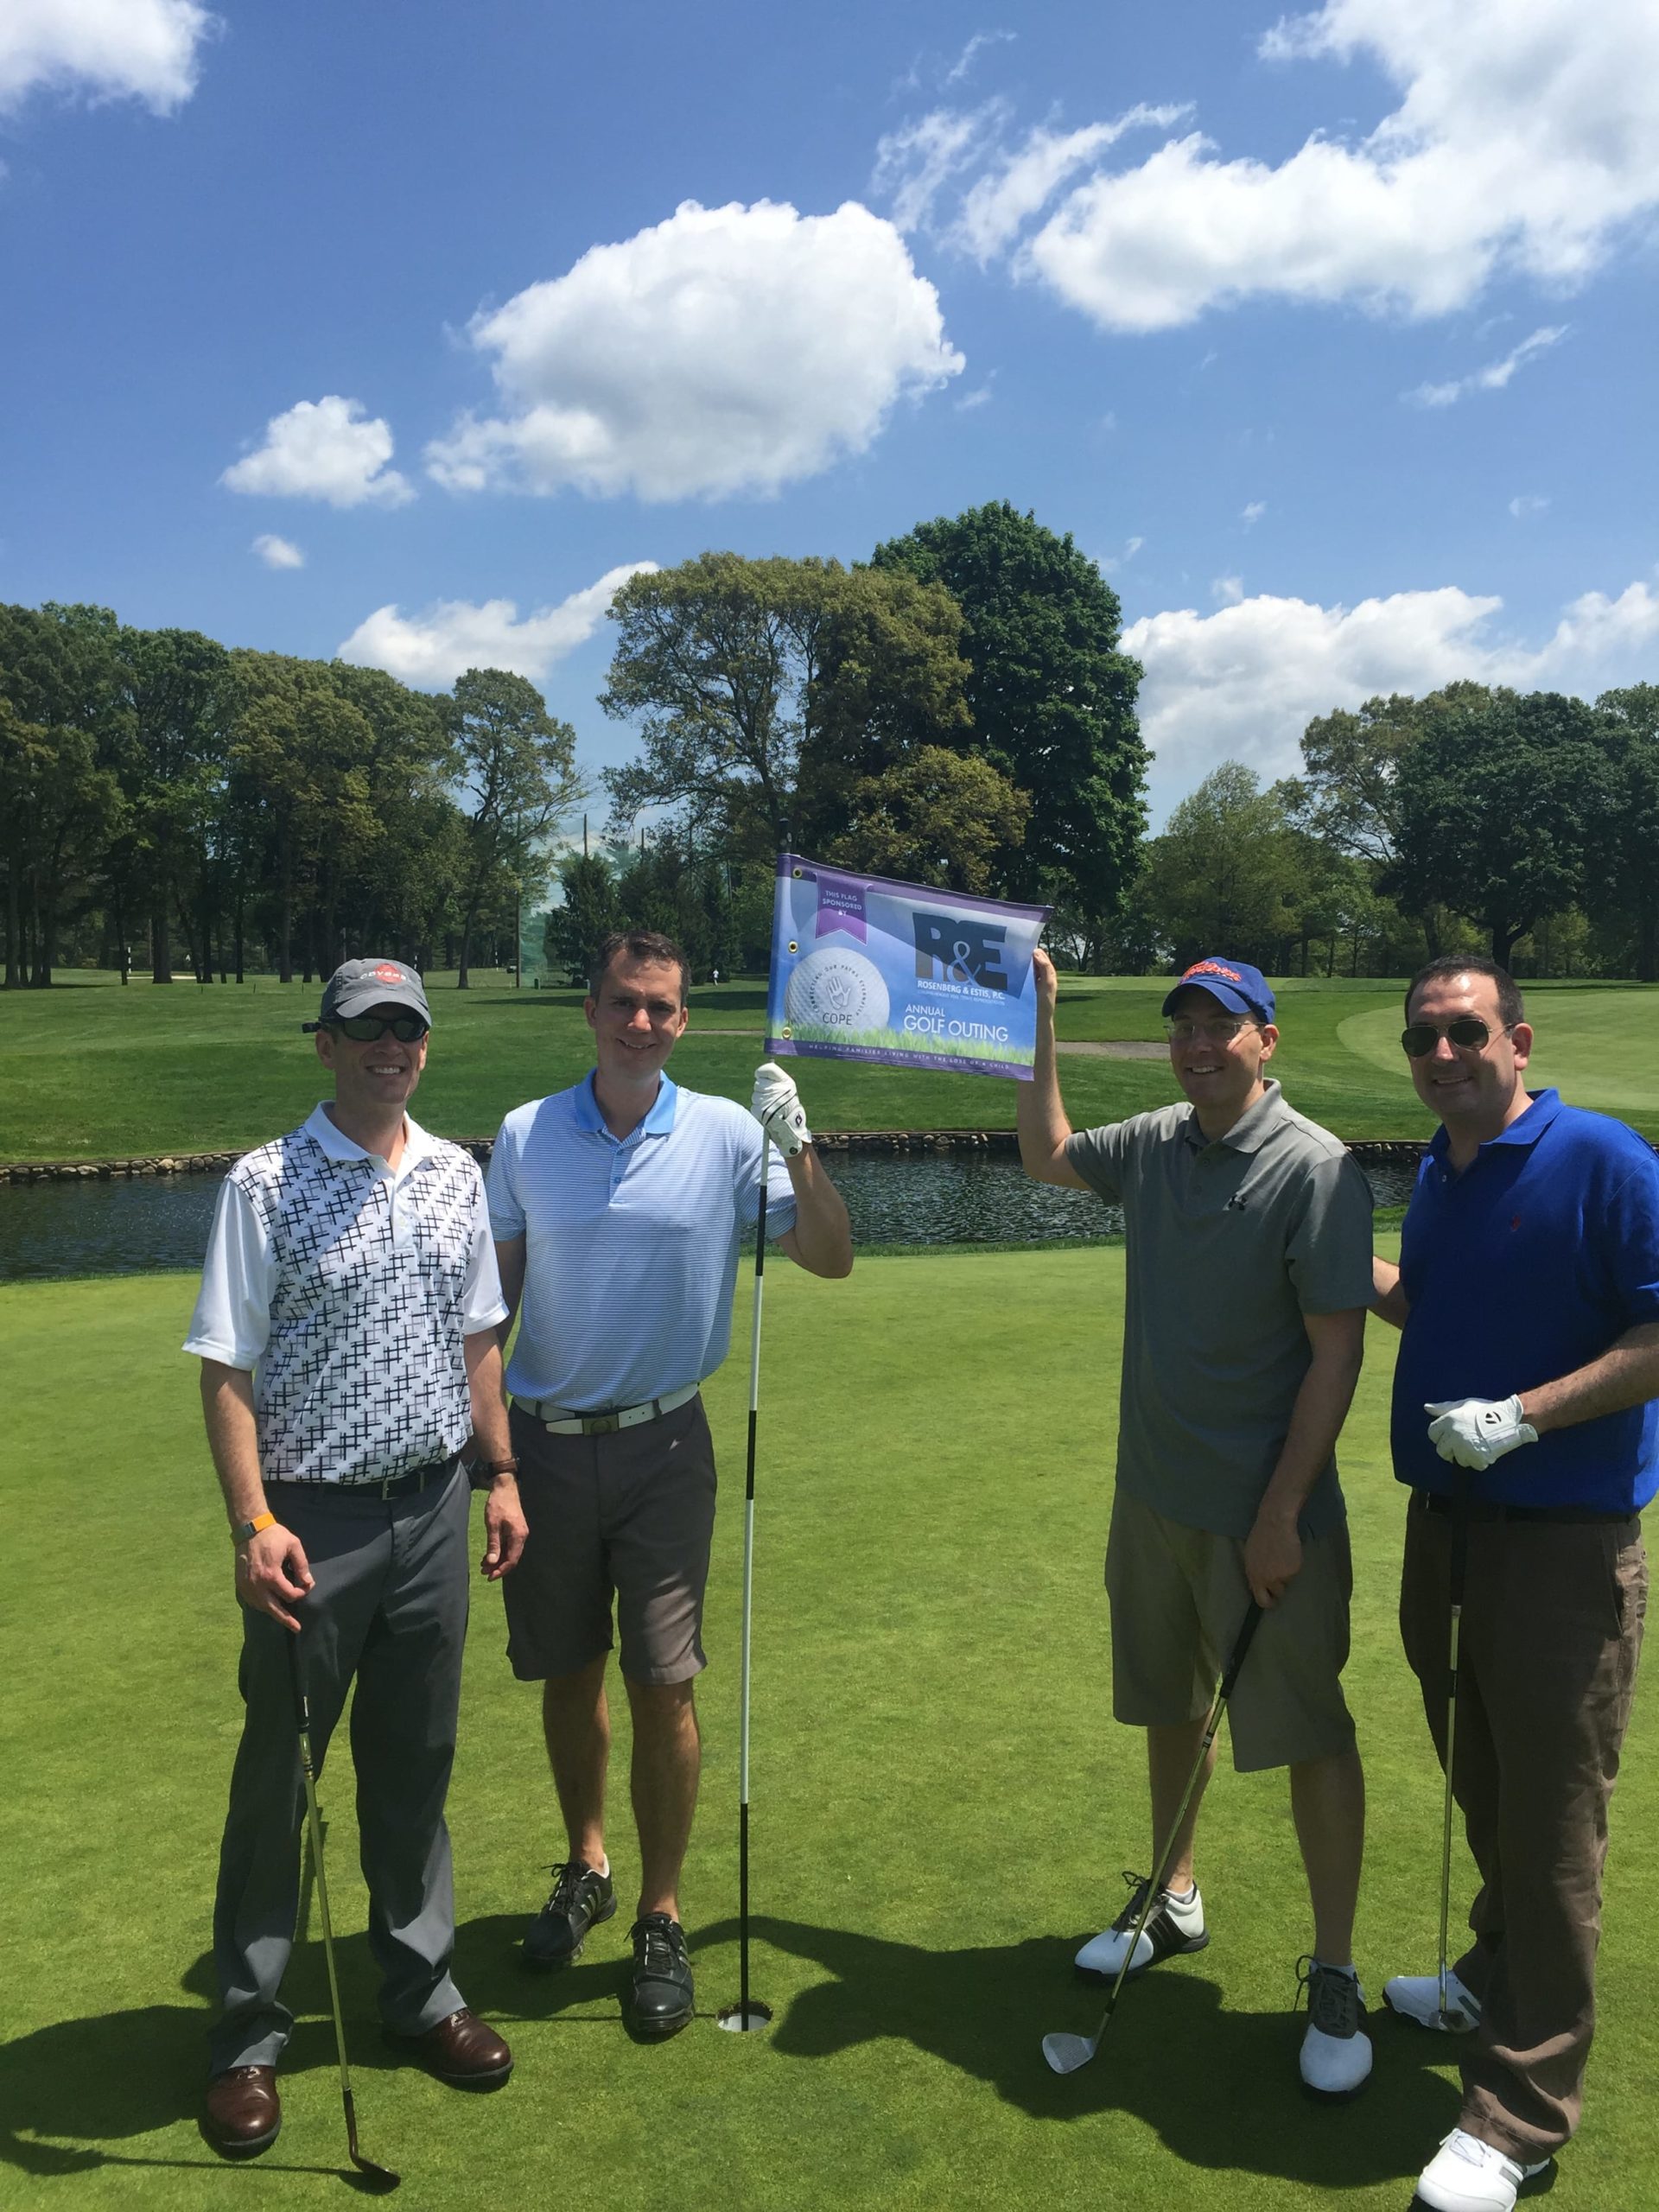 Photo of the R&E's participants holding the flag Rosenberg & Estis, P.C. comprehensive Real Estate Representation Annual Golf Outing | Connecting Our Paths Eternally